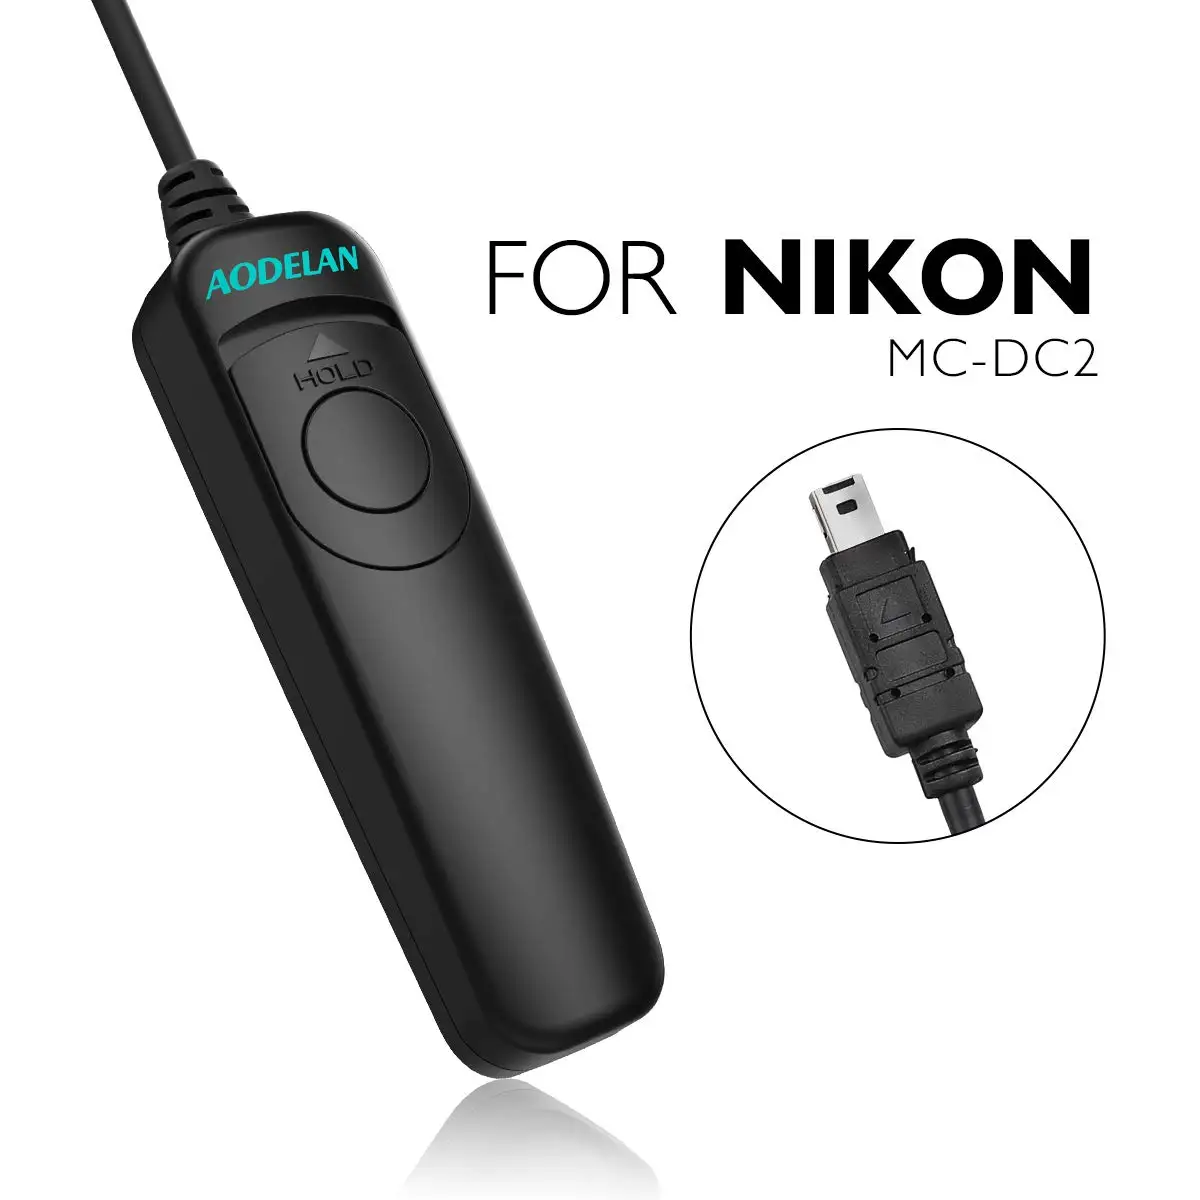 

AODELAN N10 Shutter Release Cable Remote Control for Nikon Z6,Z7, Coolpix P1000,D90,D600,D610,D3100,D3200,D3300,D5000,D5100